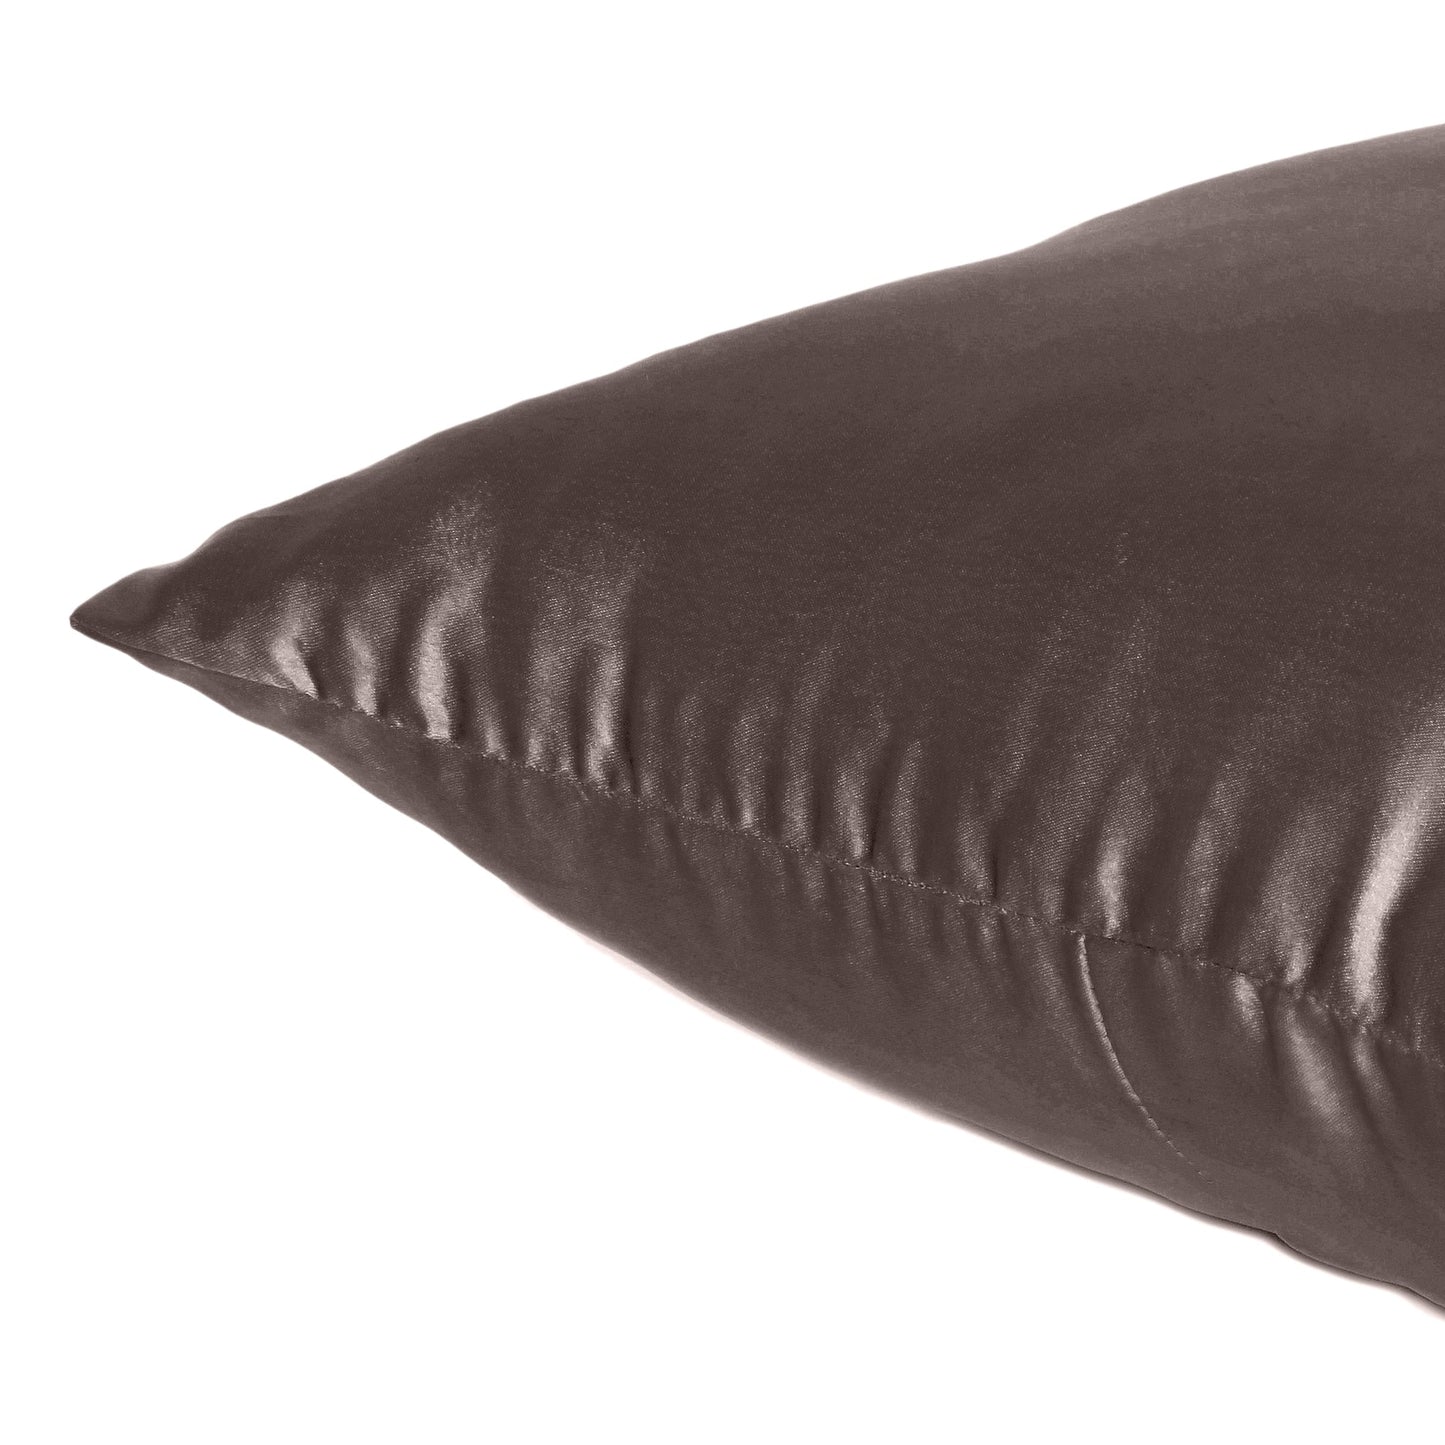 Brunette Brown Satin Silky Cushion Covers in Set of 2